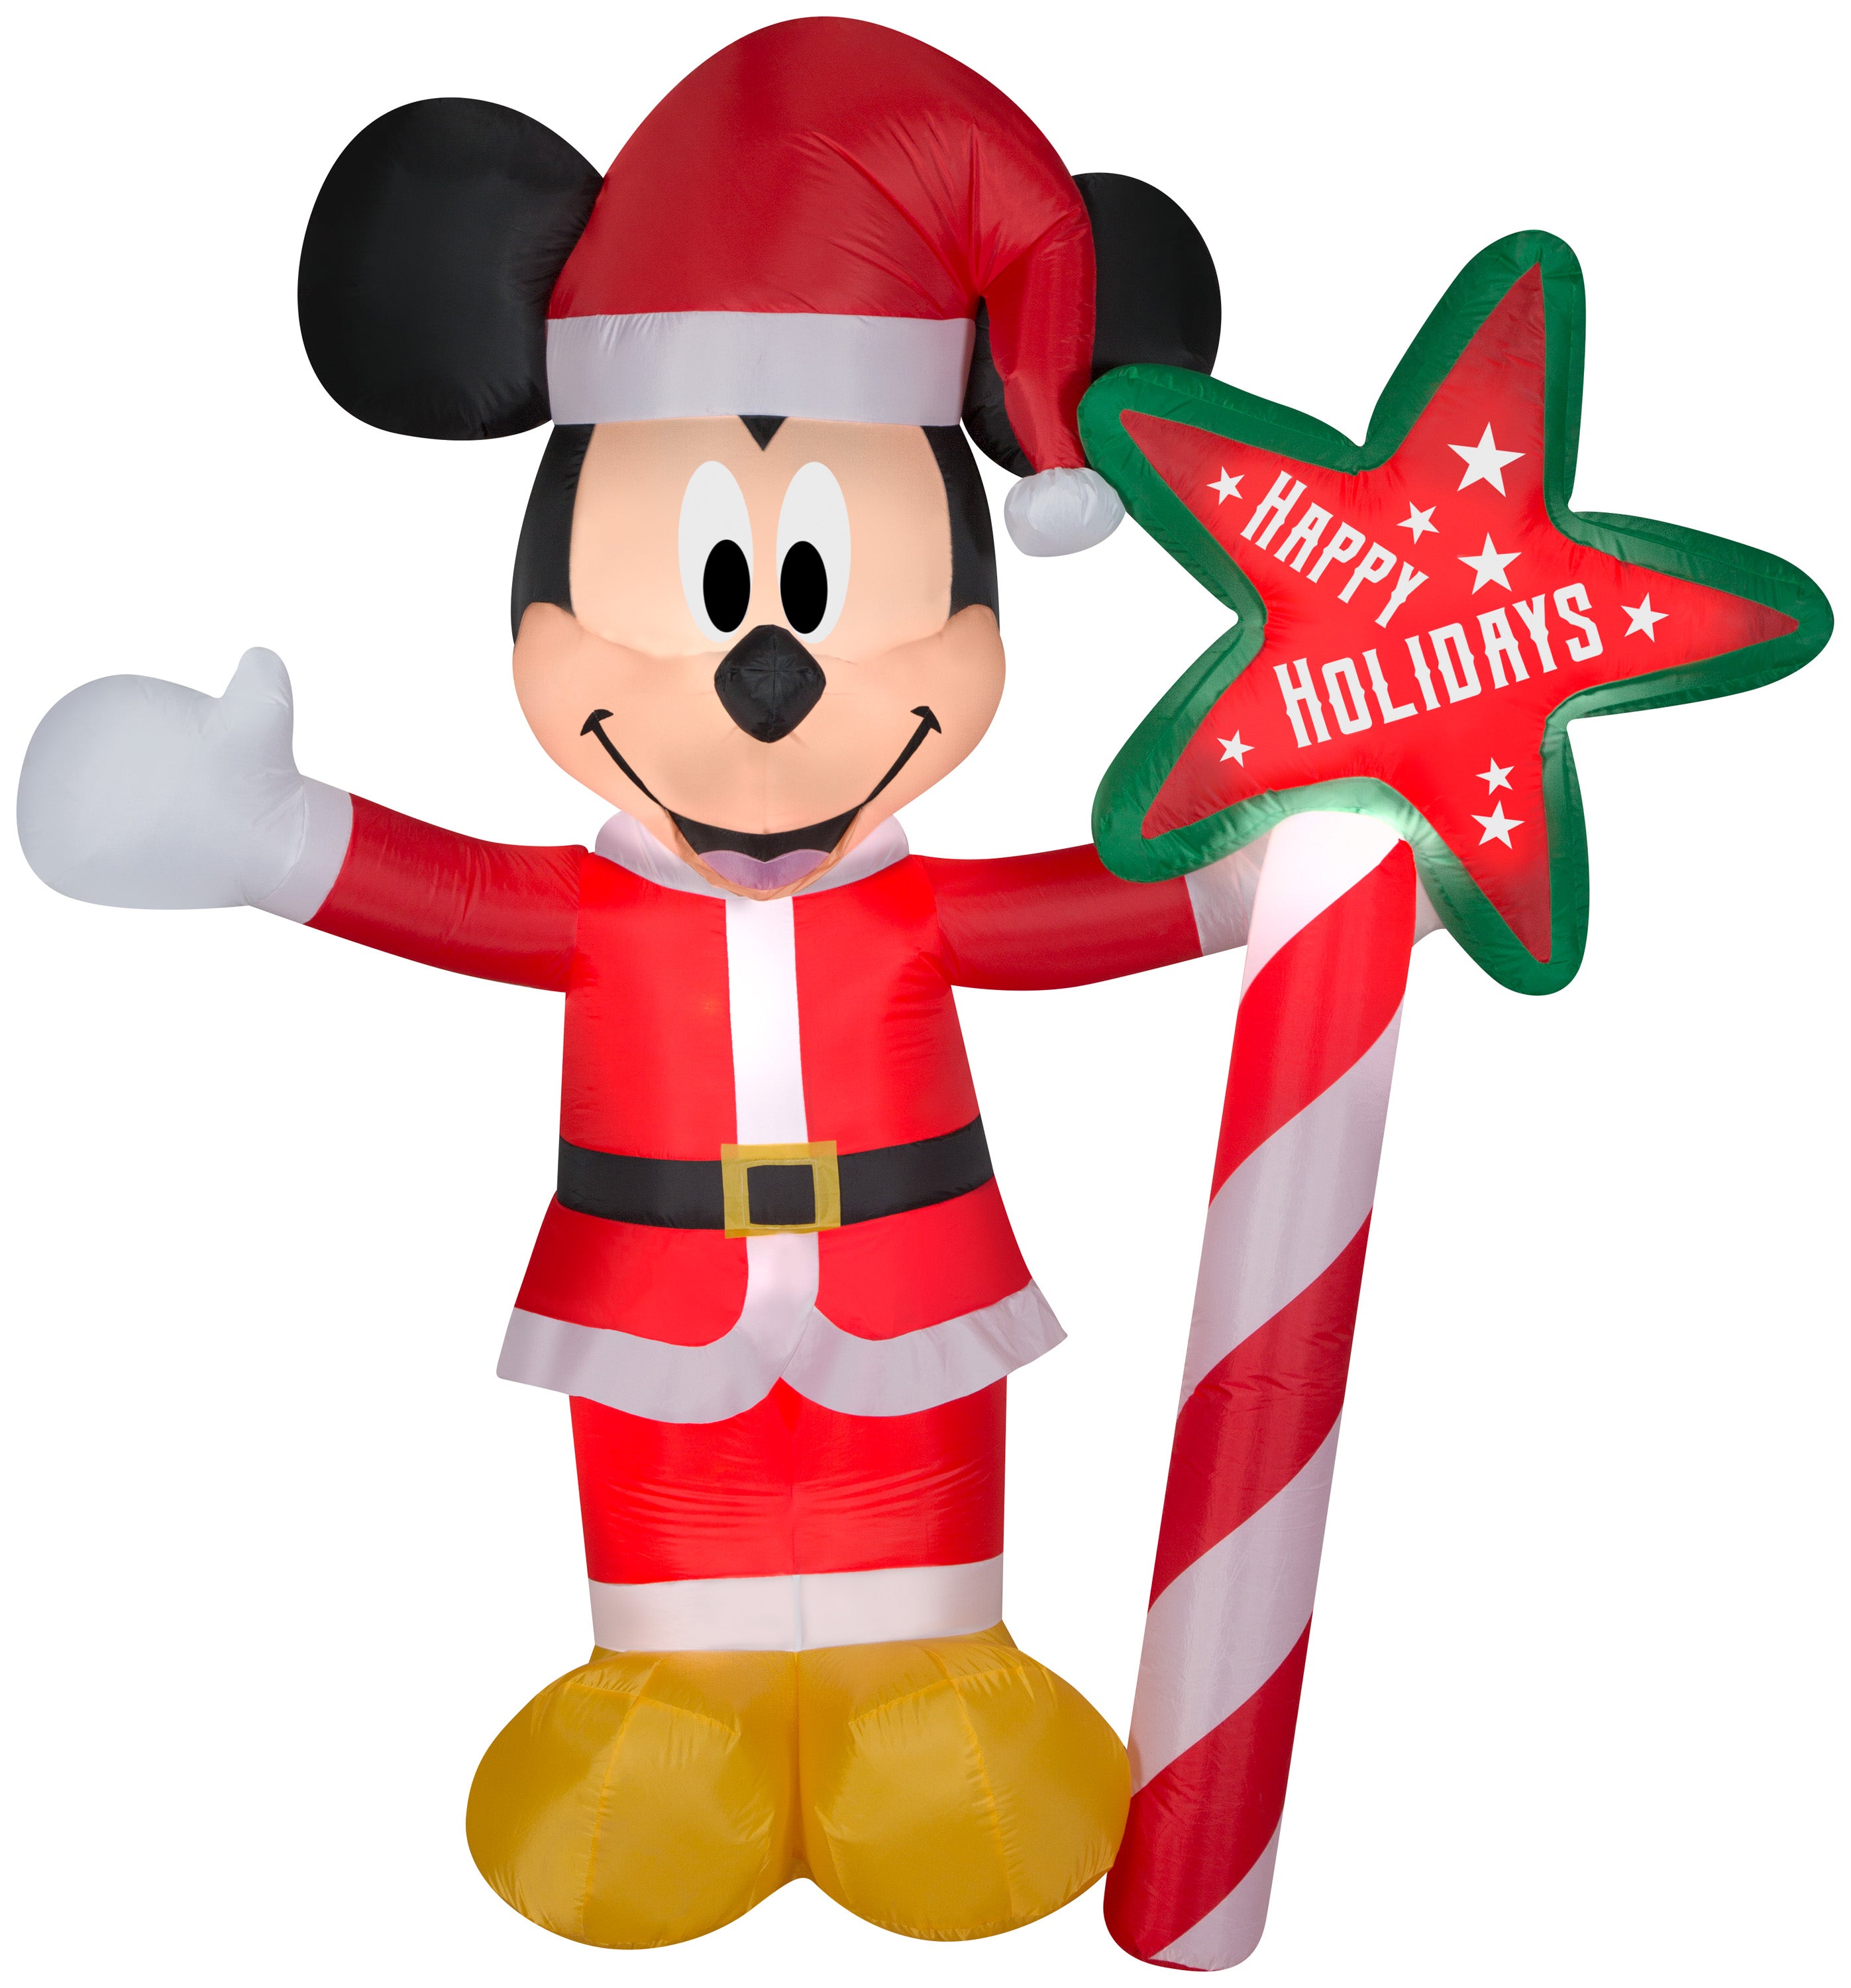 Gemmy Christmas Airblown Inflatable Inflatable Mickey Mouse with "Happy Holidays" Sign, 7 ft Tall